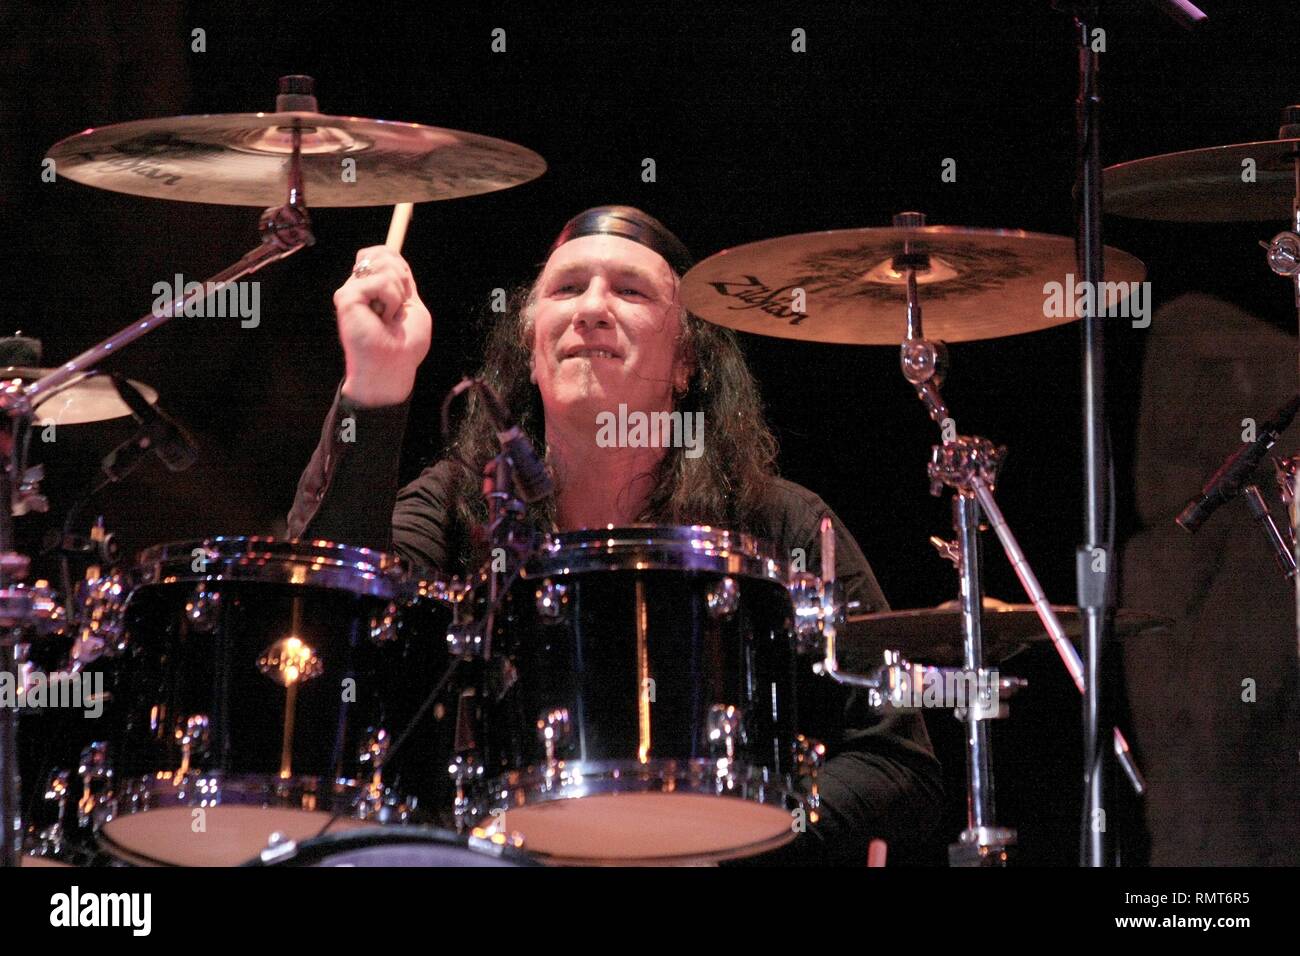 Drummer Robb 'Geza' Reiner of the Heavy Metal band Anvil is shown performing on stage during a 'live' concert appearance. Stock Photo